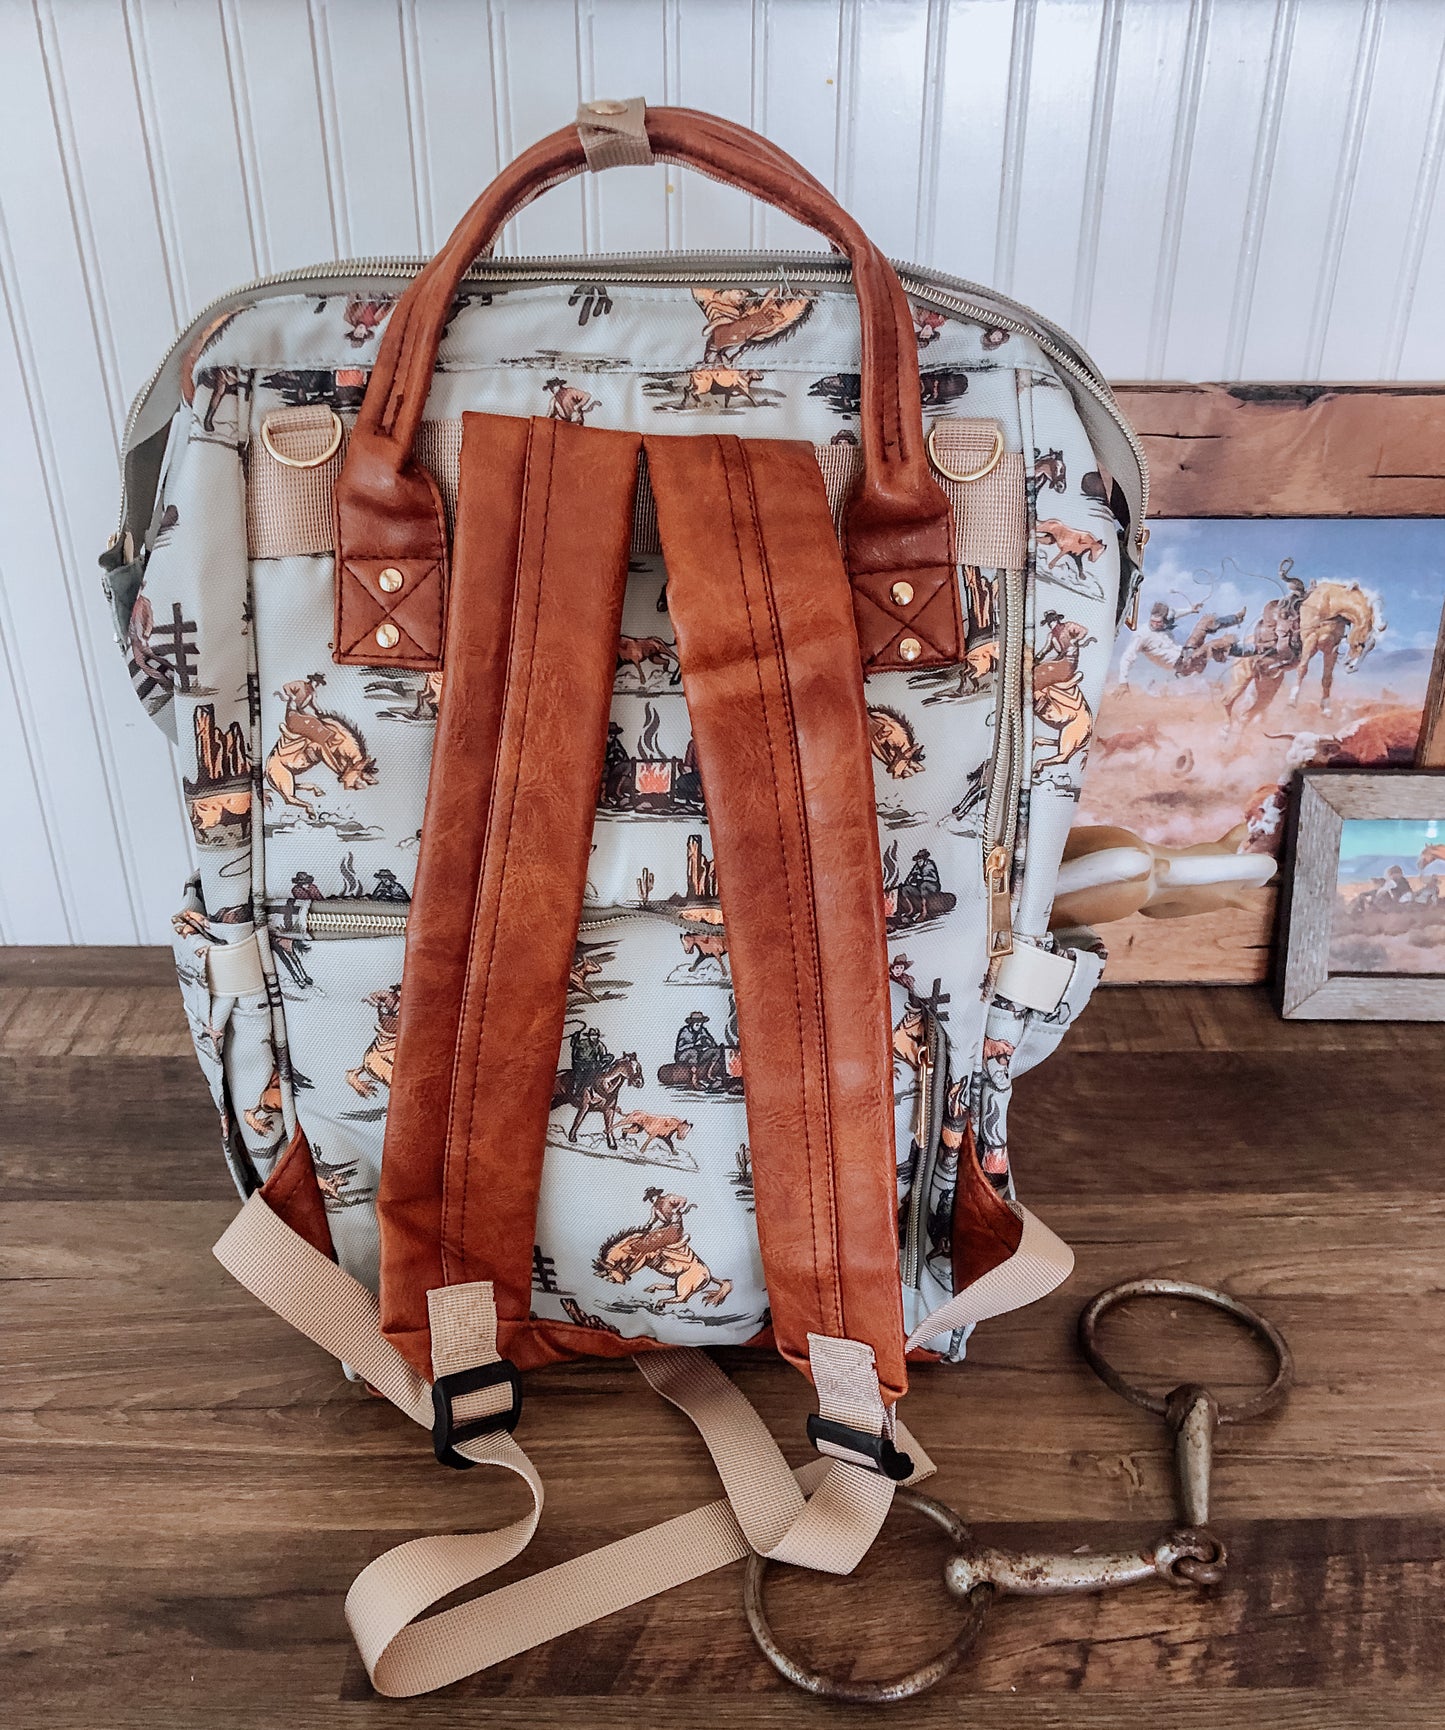 Tales of the Old West Diaper Bag Backpack